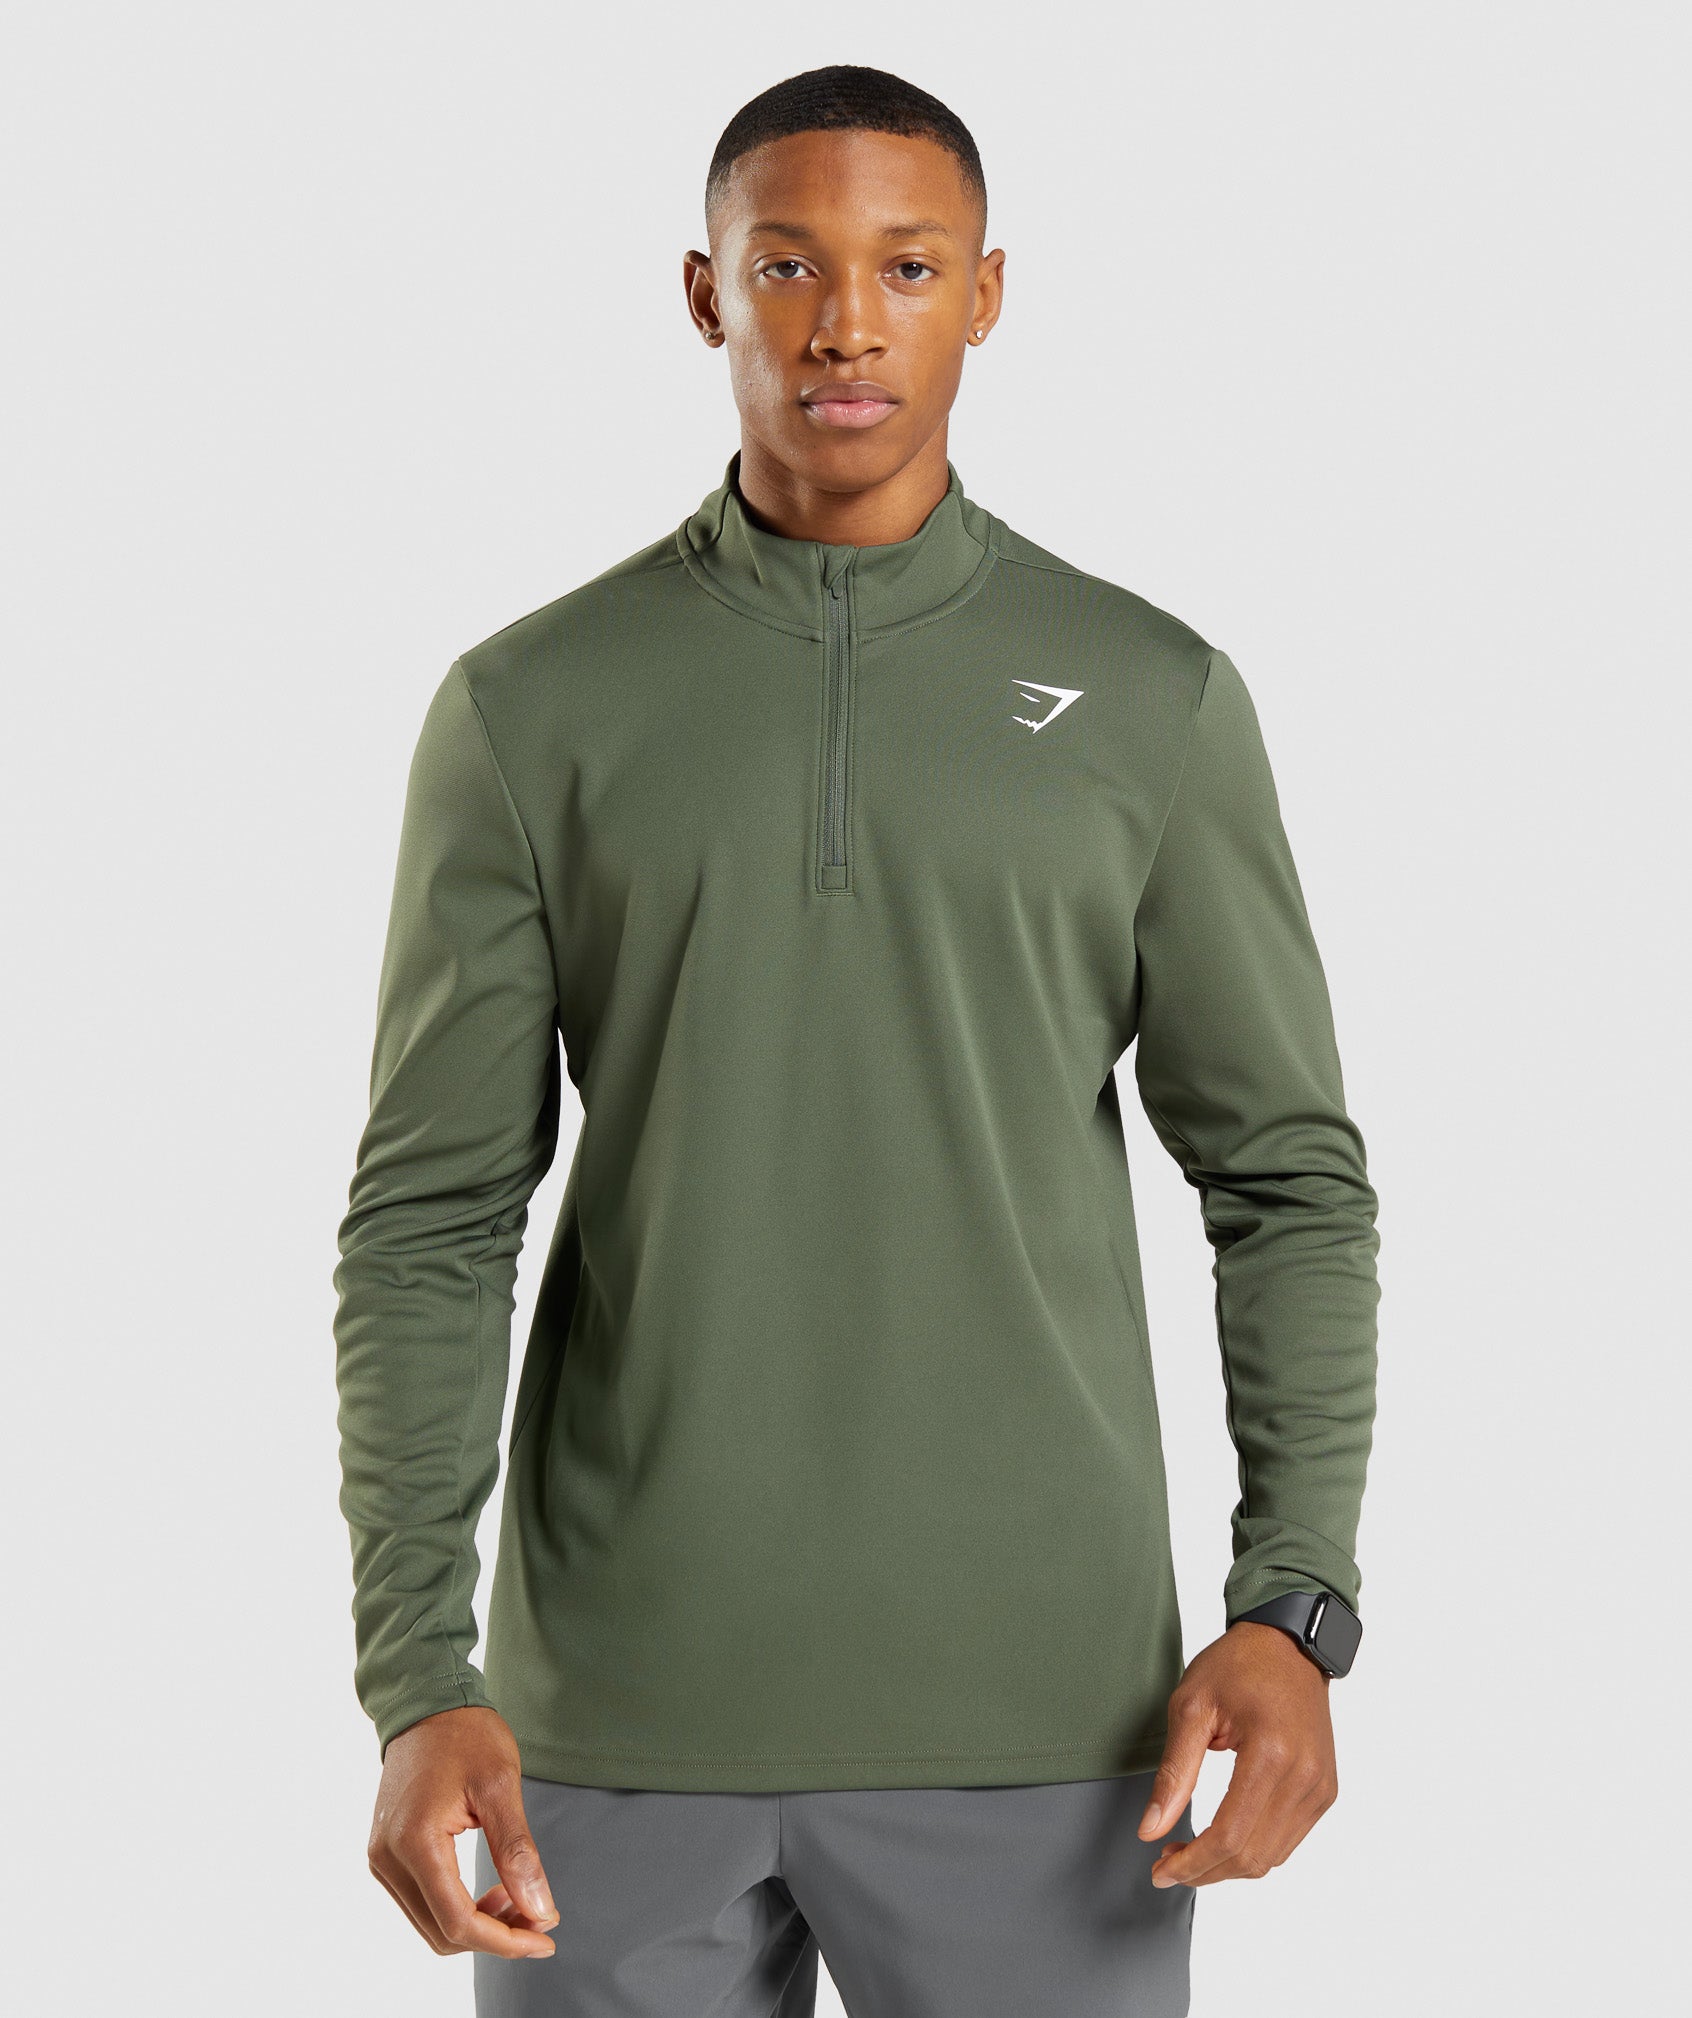 Arrival 1/4 Zip Pullover in Core Olive - view 1